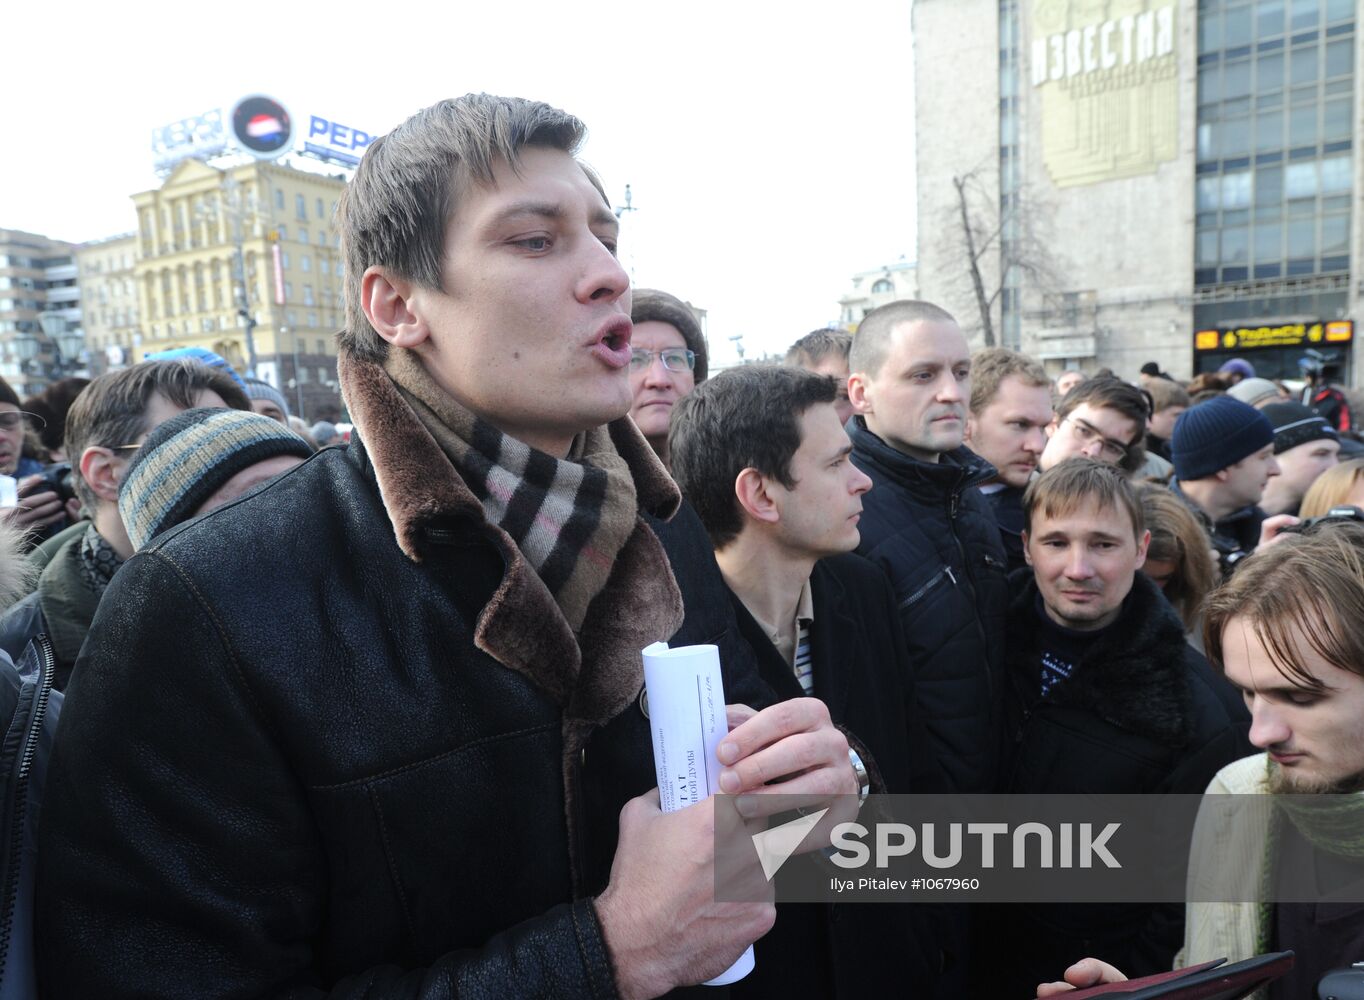 Opposition rally on Pushkin Square